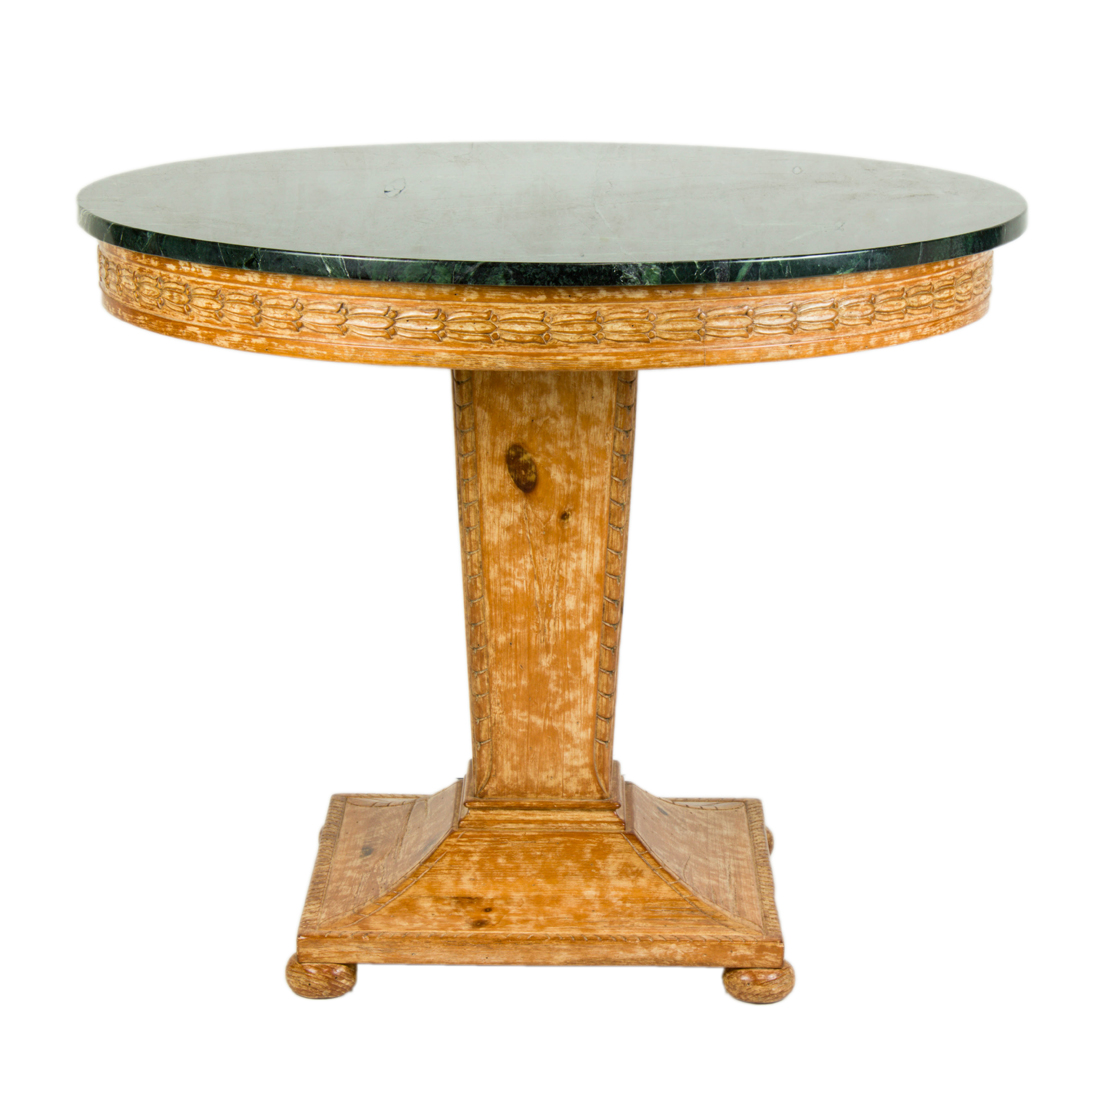 A CONTINENTAL MARBLE TOP CENTER